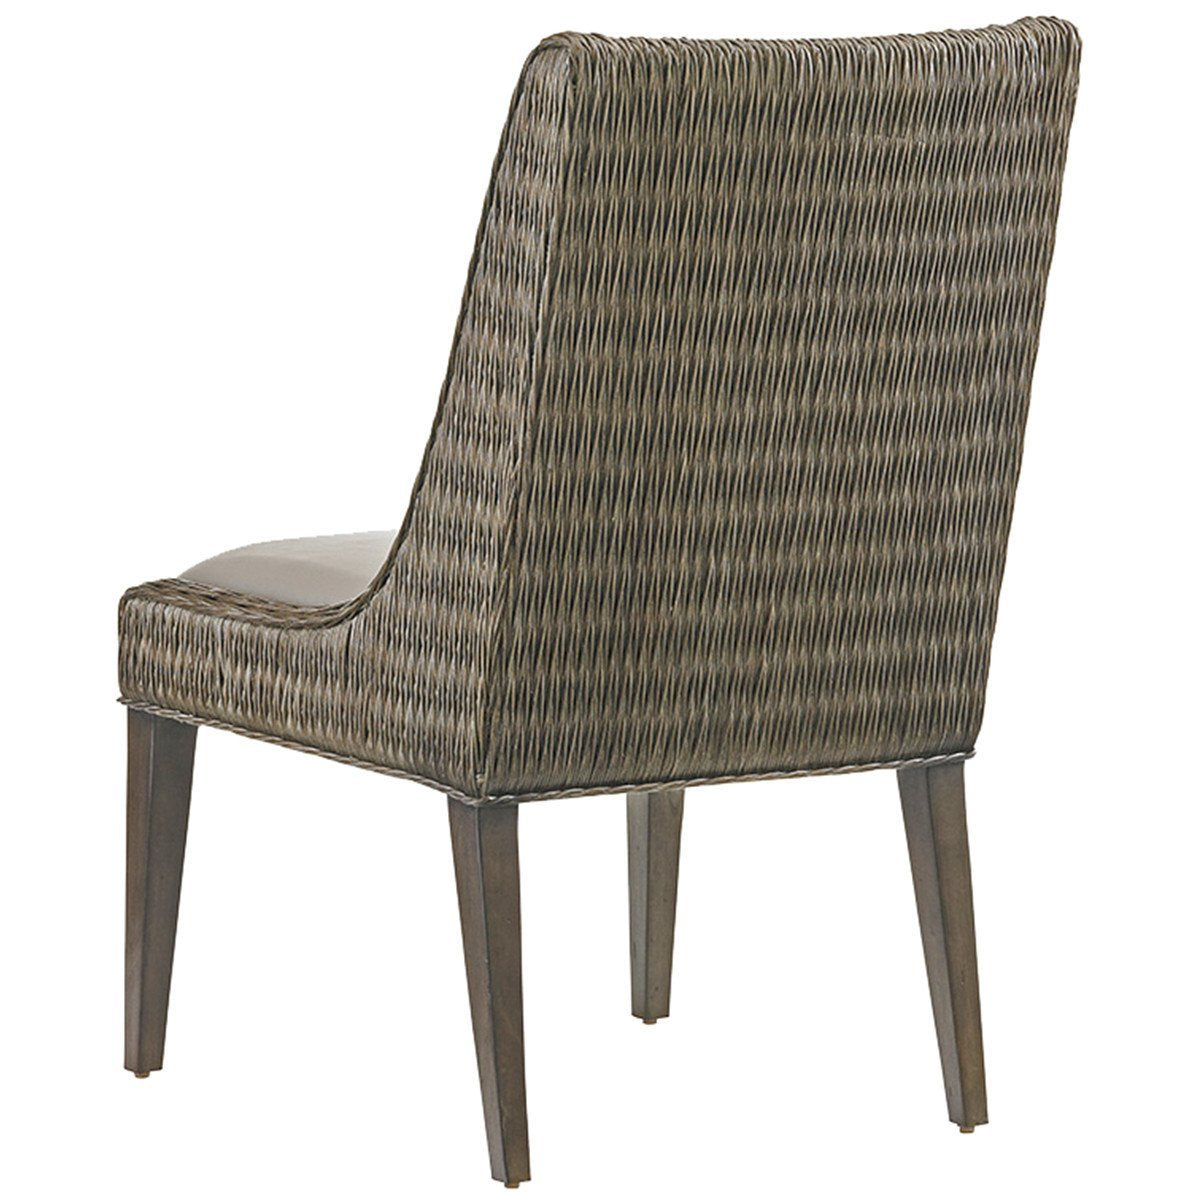 Tommy Bahama Cypress Point Brandon Side Chair